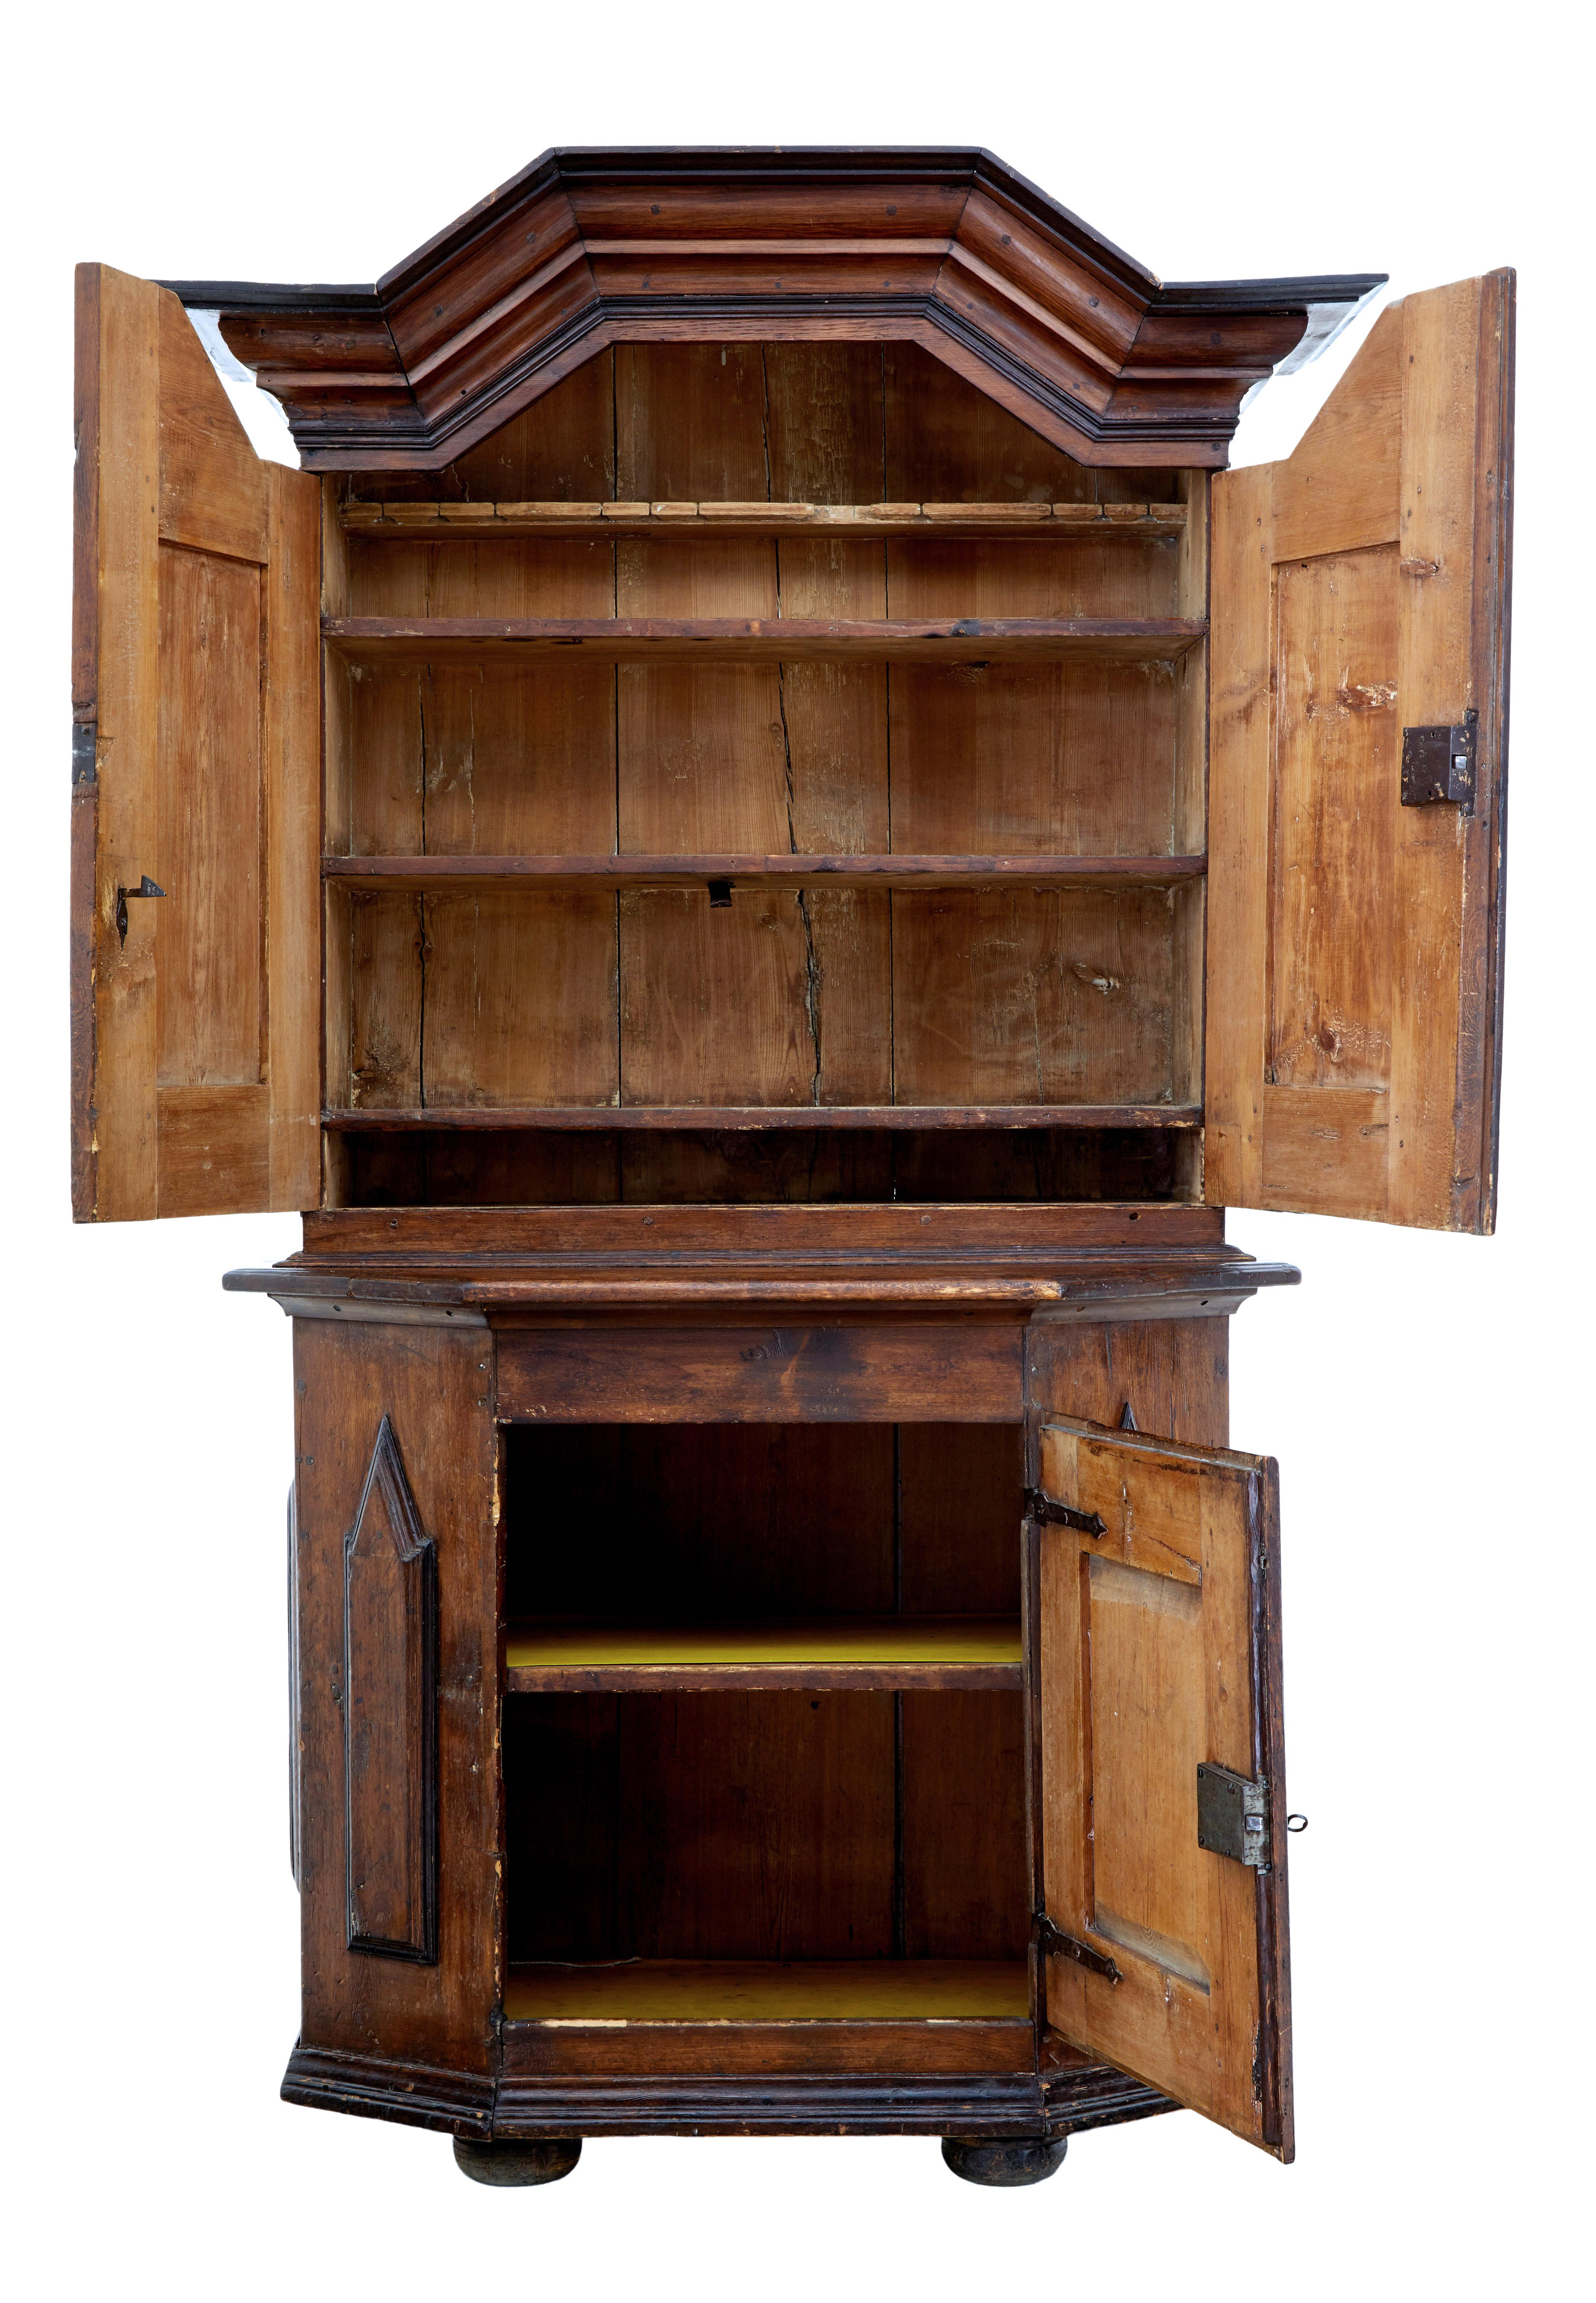 Rustic Swedish 2 part Baroque cupboard circa 1790.

Stained pine Baroque cupboard, a real piece of Scandinavian rustic made furniture. Shaped cornice below and double door cupboard containing various fixed shelves. Shaped bottom section with a